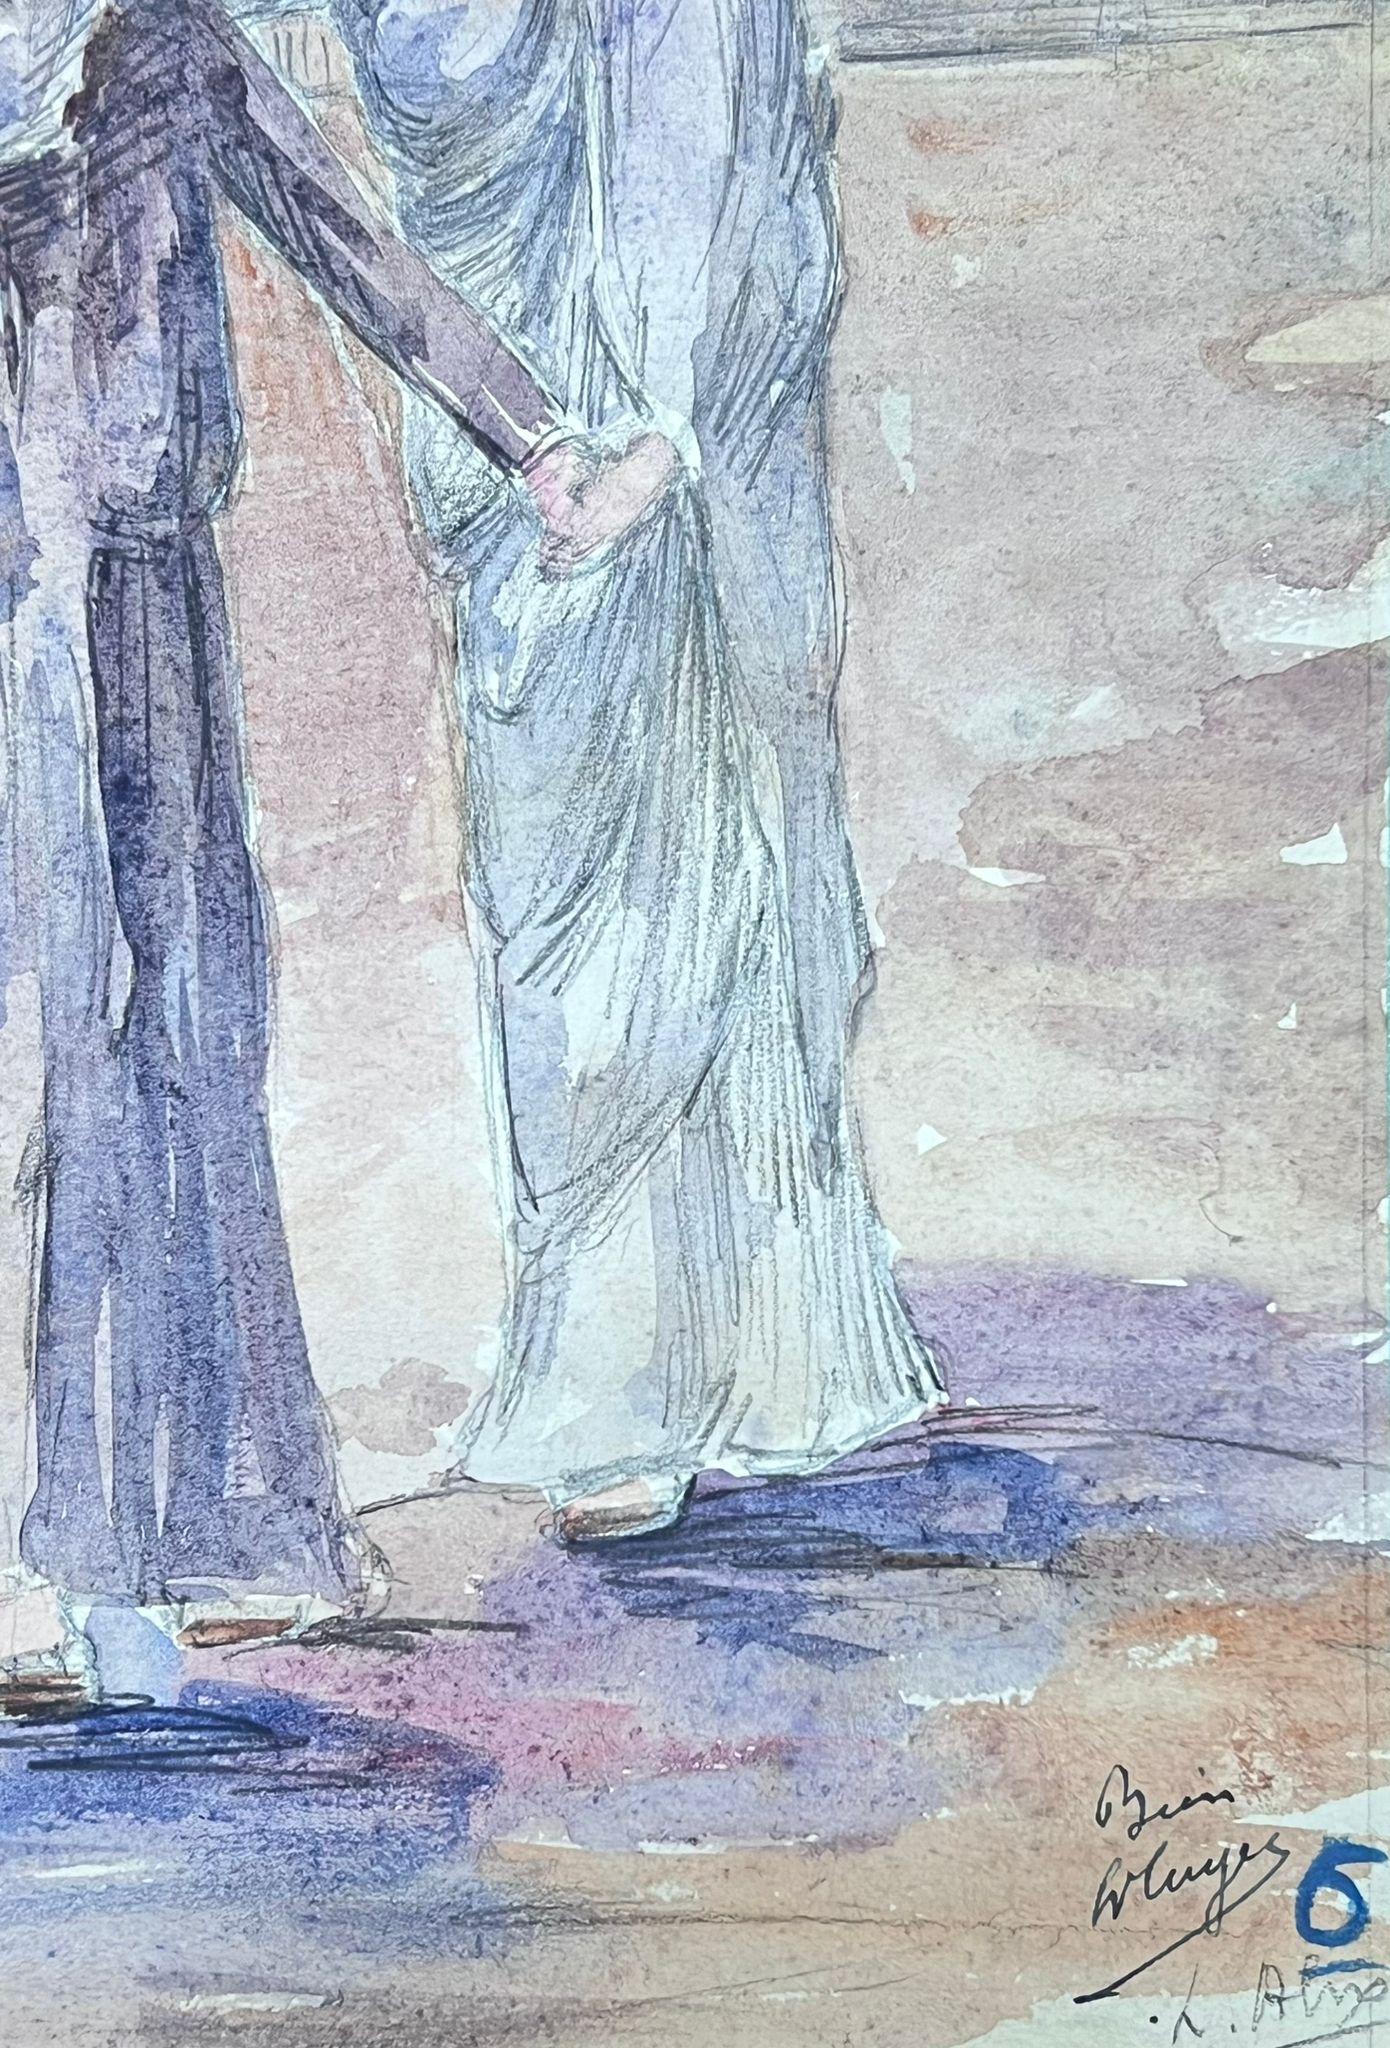 French Figures
signed by Louise Alix (French, 1888-1980) *see notes below
provenance stamp to the back 
watercolour painting on artist paper, unframed
measures: 10.75 high by 7.25 inches wide
condition: overall very good and sound, a few scuffs and